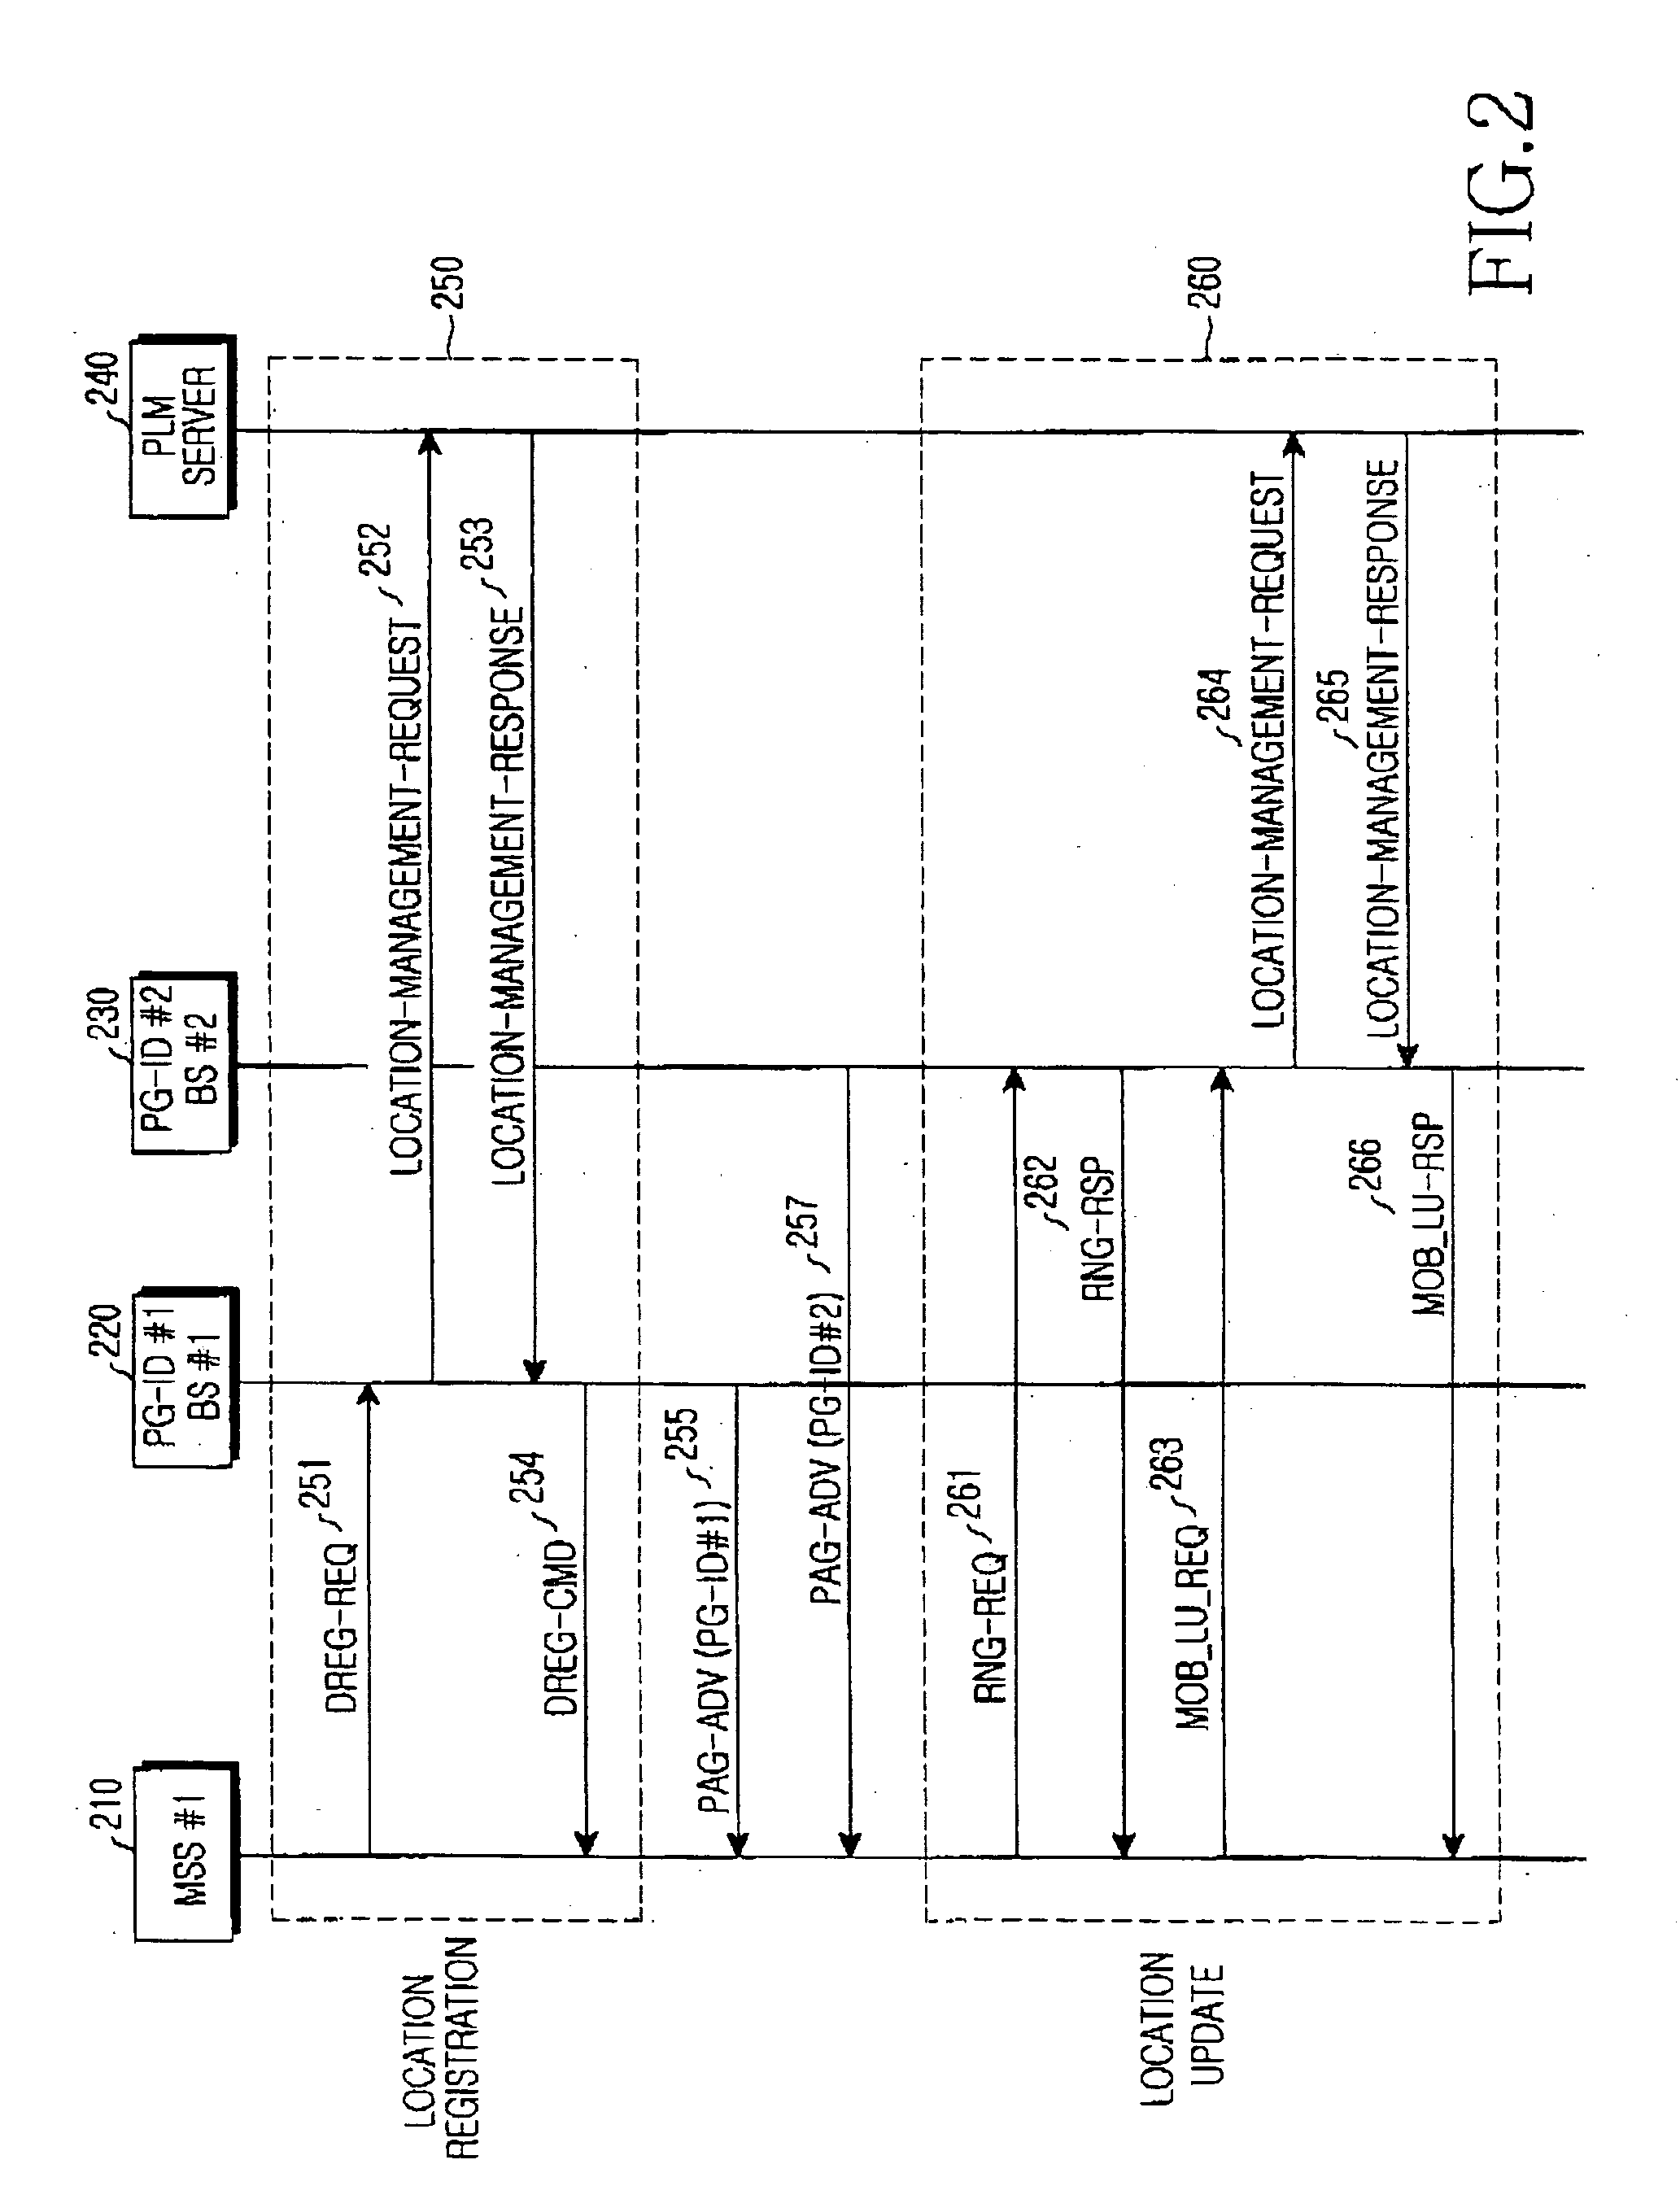 System and method for controlling idle mode location in a broadband wireless access communication system